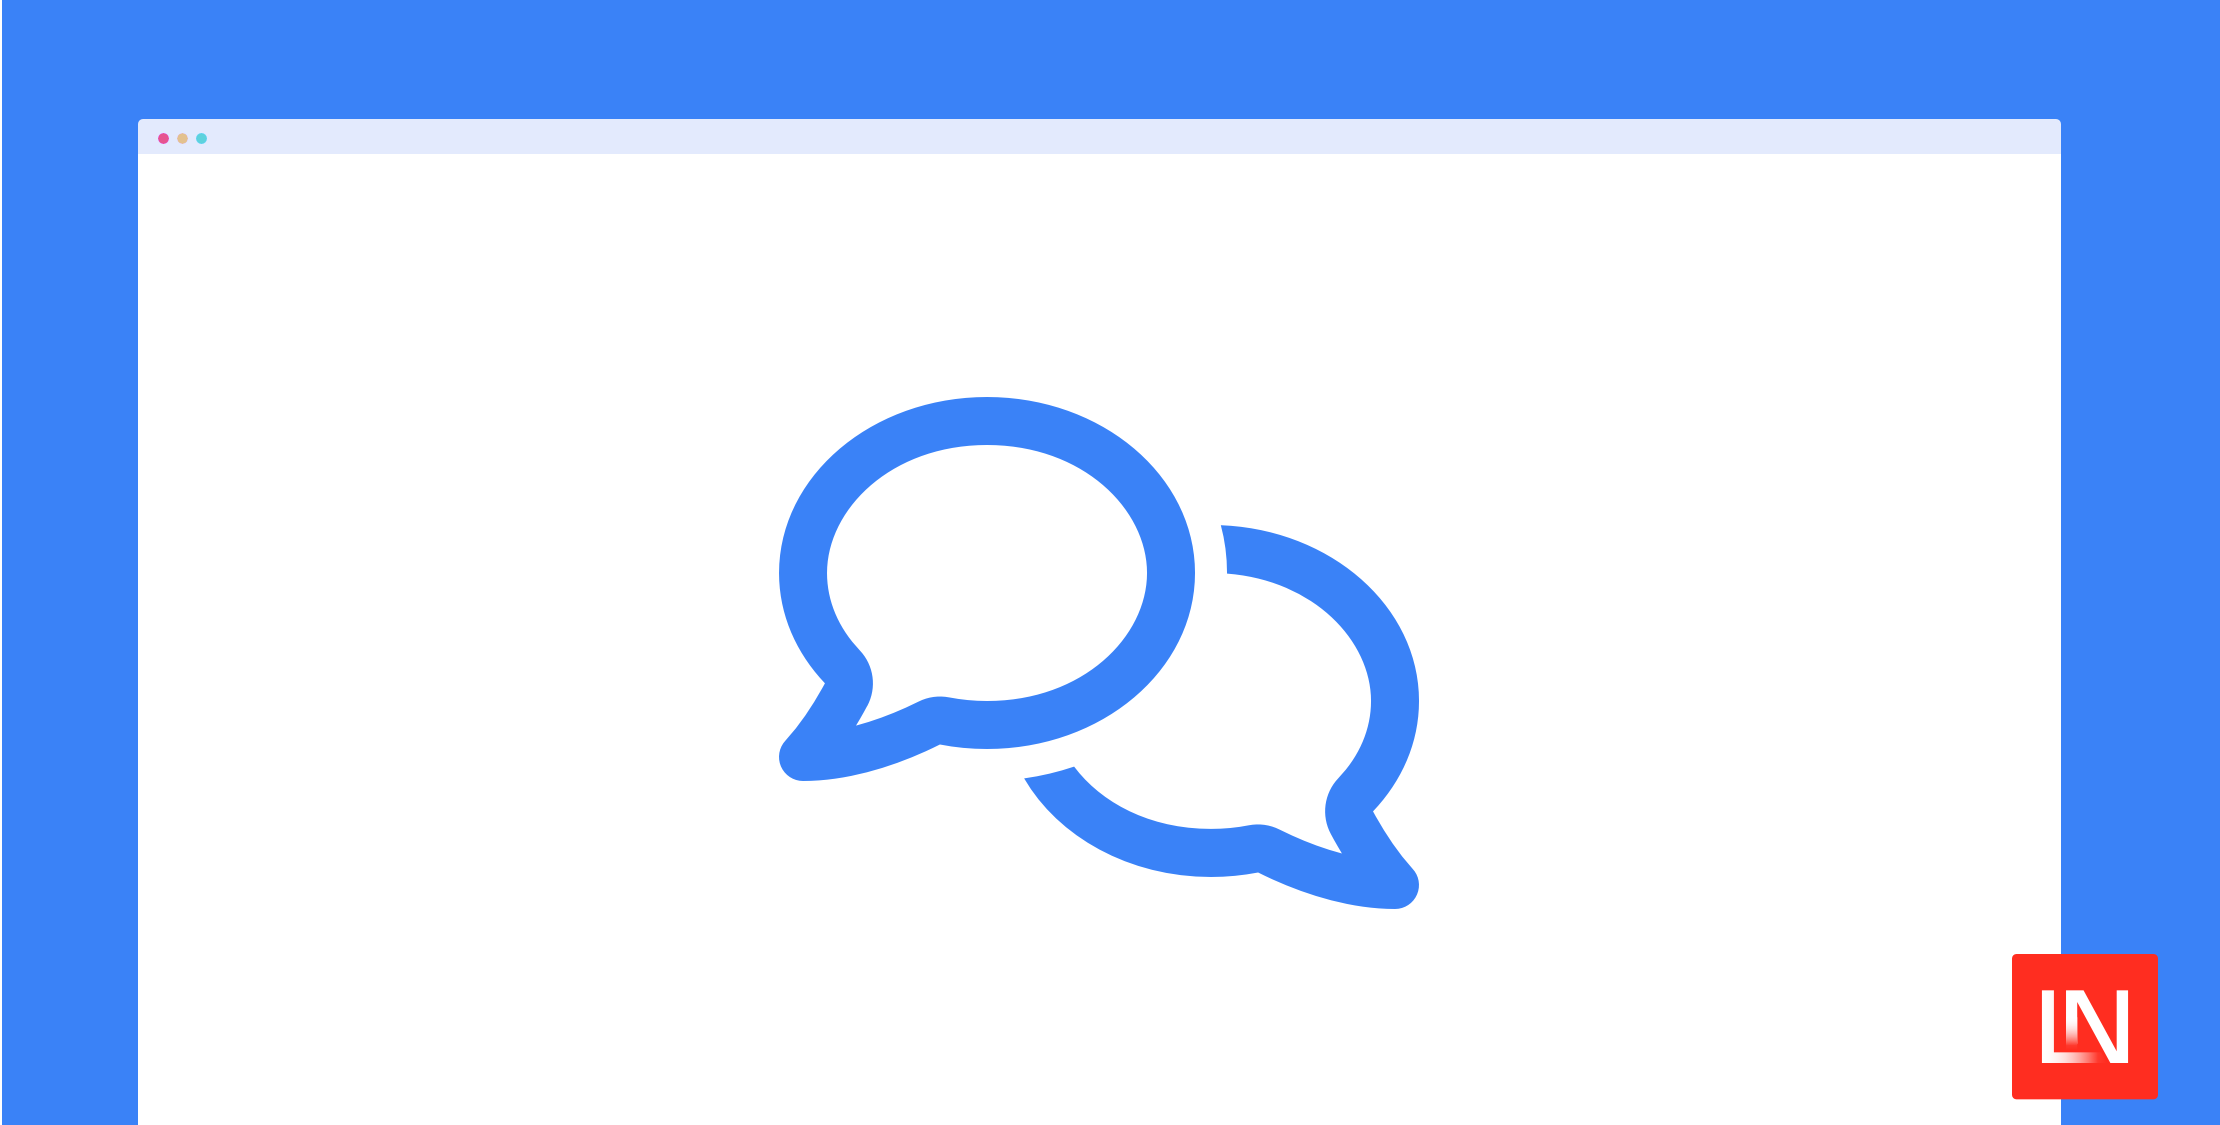 Basement Chat is a real-time chat widget package image